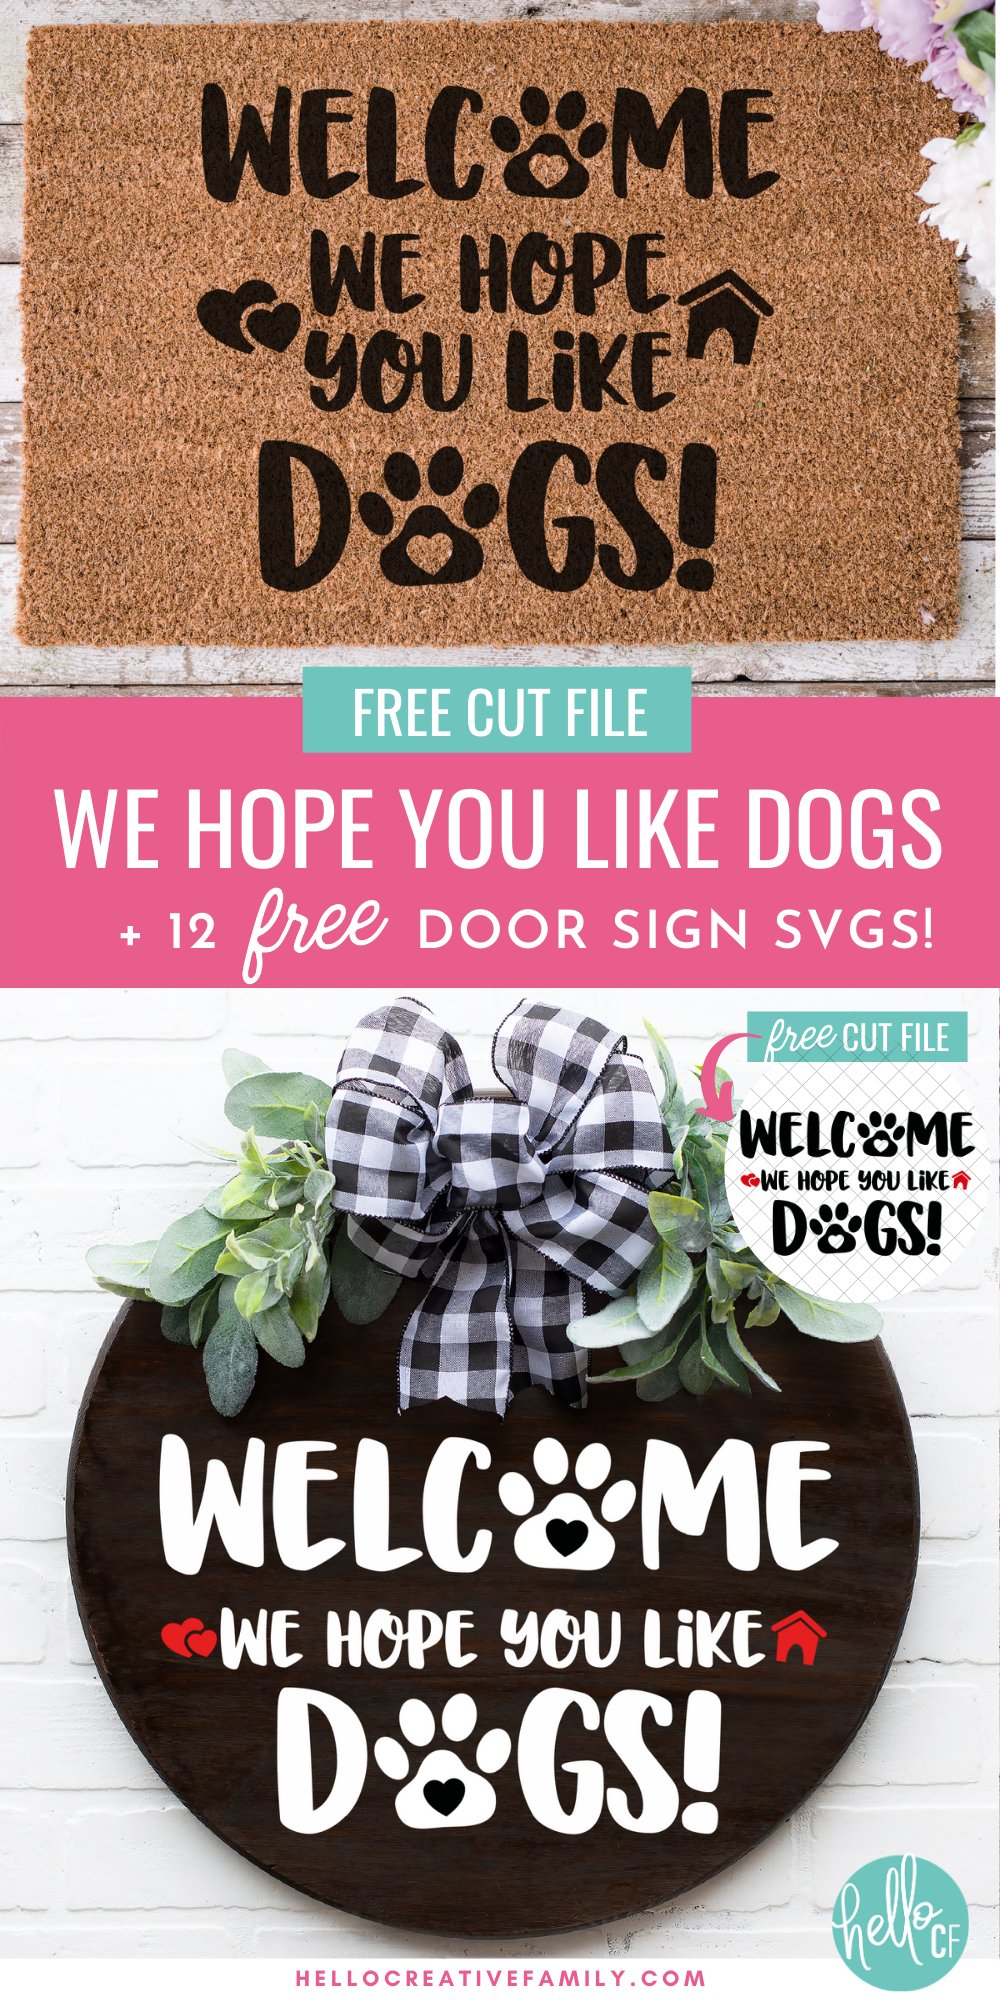 Make a Welcome We Hope You Like Dogs Door Sign or Doormat with this free cut file! Make a fun and easy handmade gift for dog lovers in your life! Includes 12 free door sign svgs that you can craft using your Cricut Maker, Cricut Explore Air 2 or Cricut Joy! Perfect for pet owners!